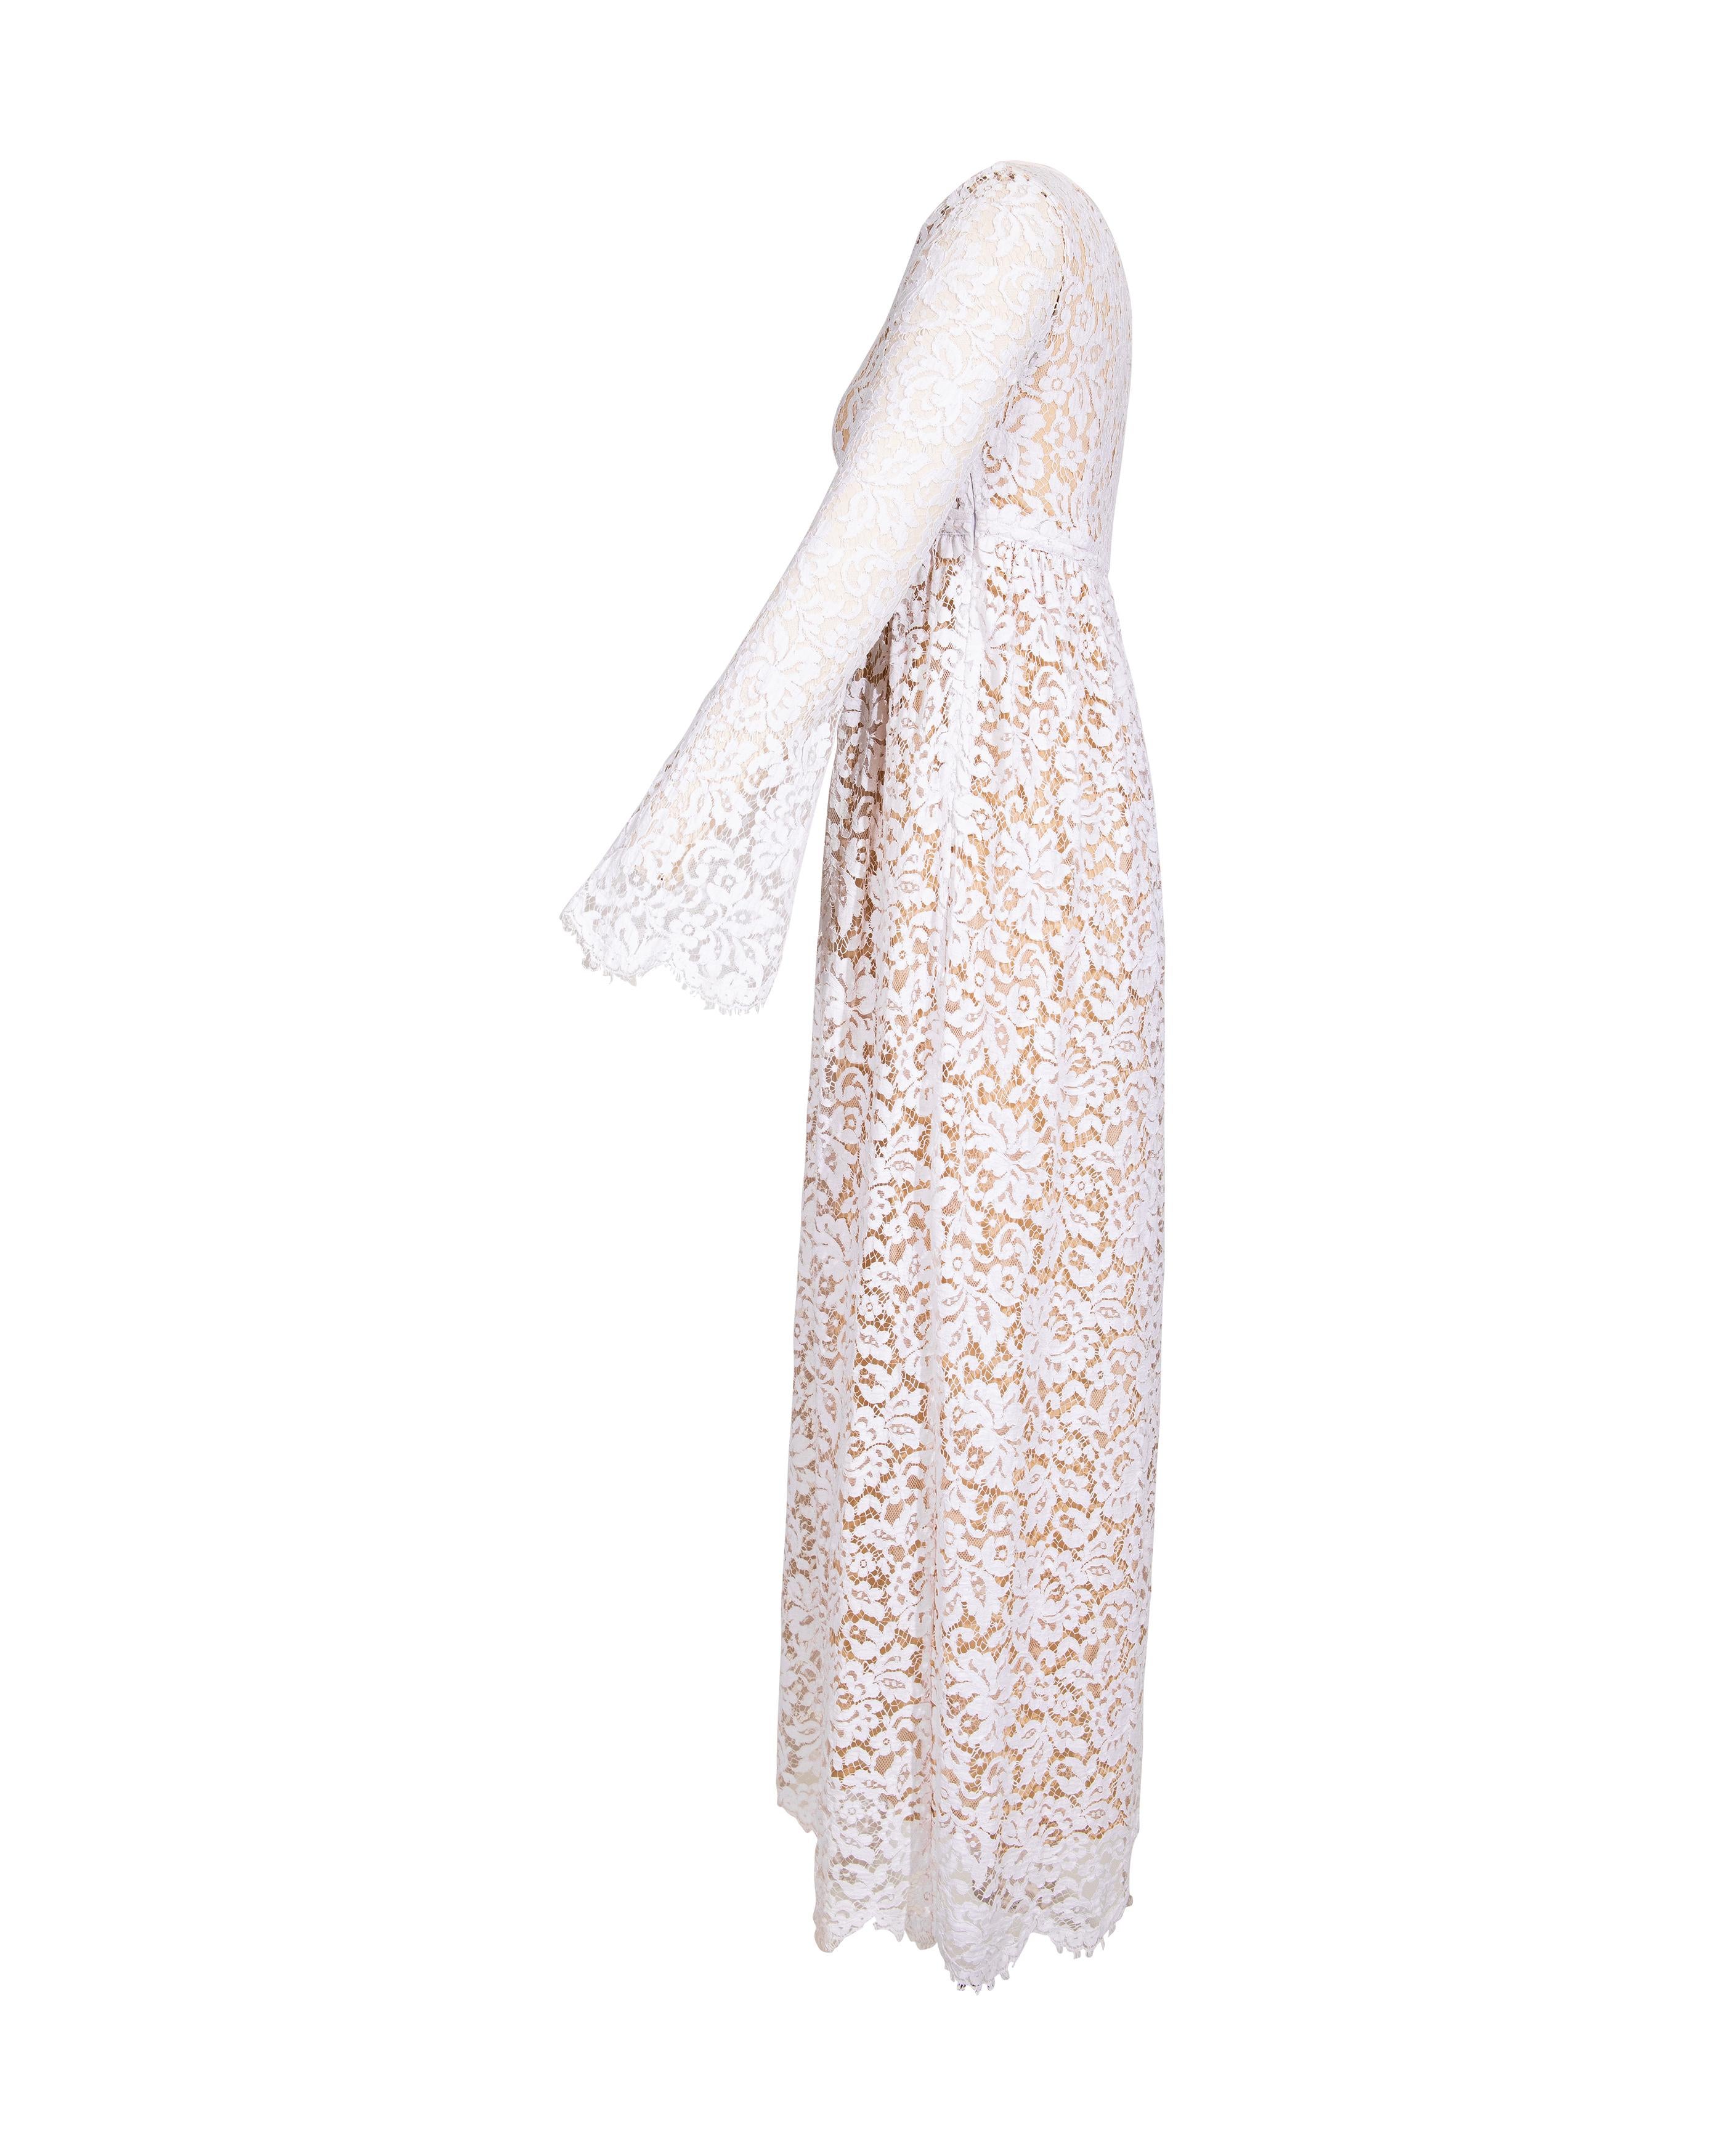 S/S 1996 Gucci by Tom Ford White Lace Gown with Nude Lining 1